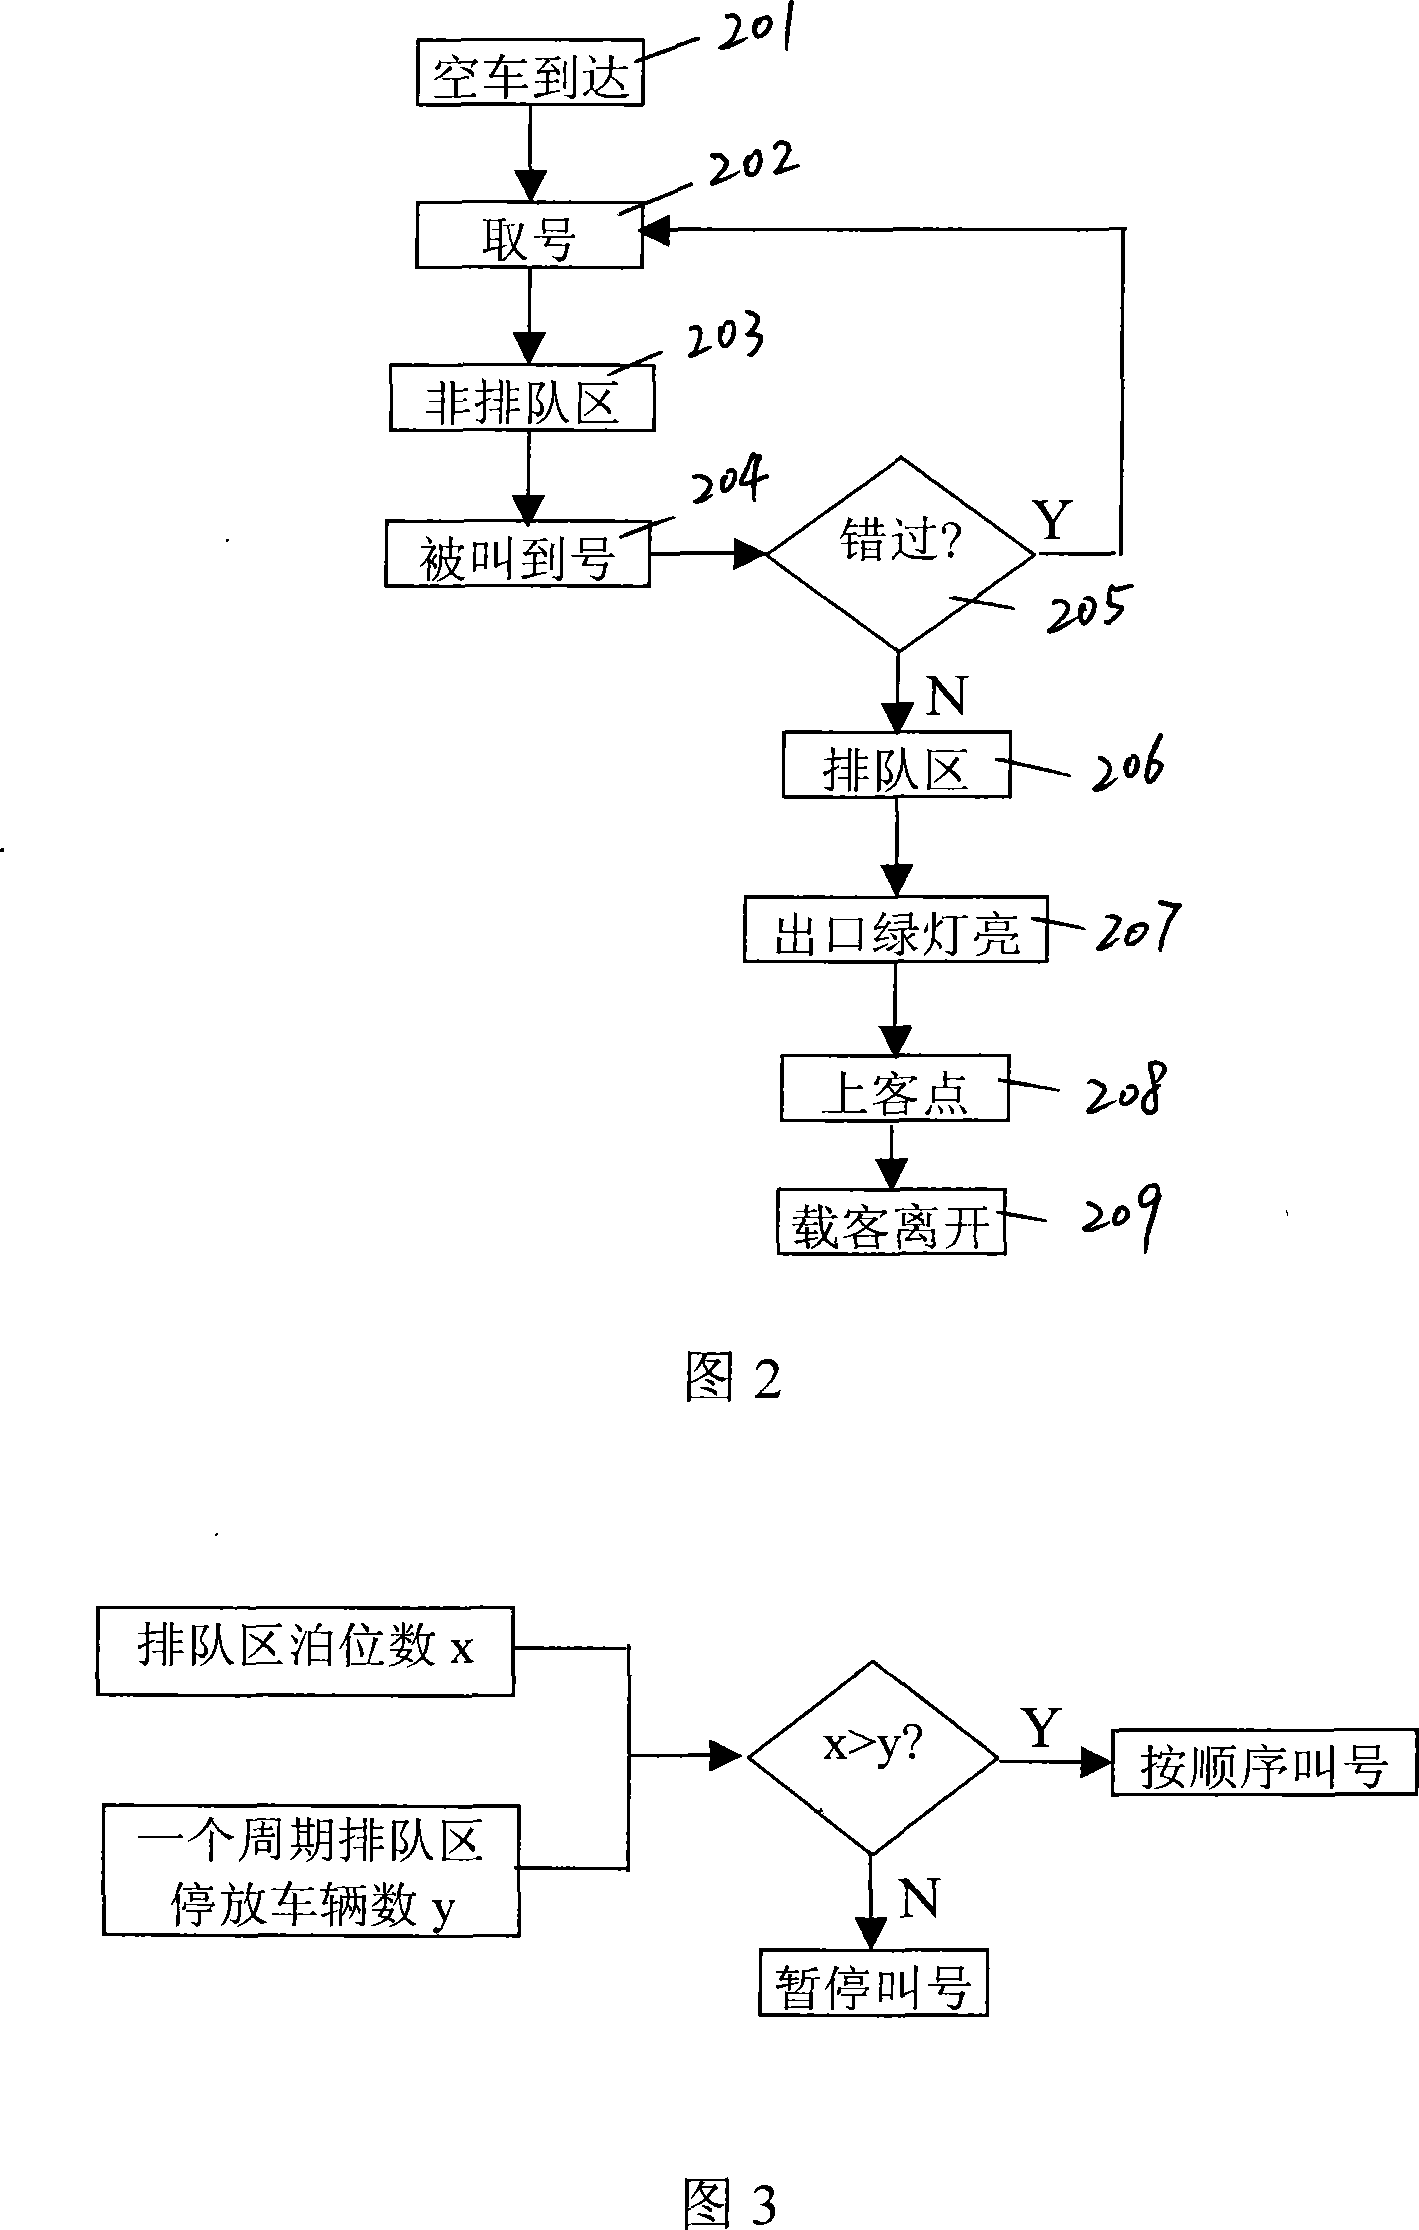 Taxi passenger-waiting queueing system and management method thereof